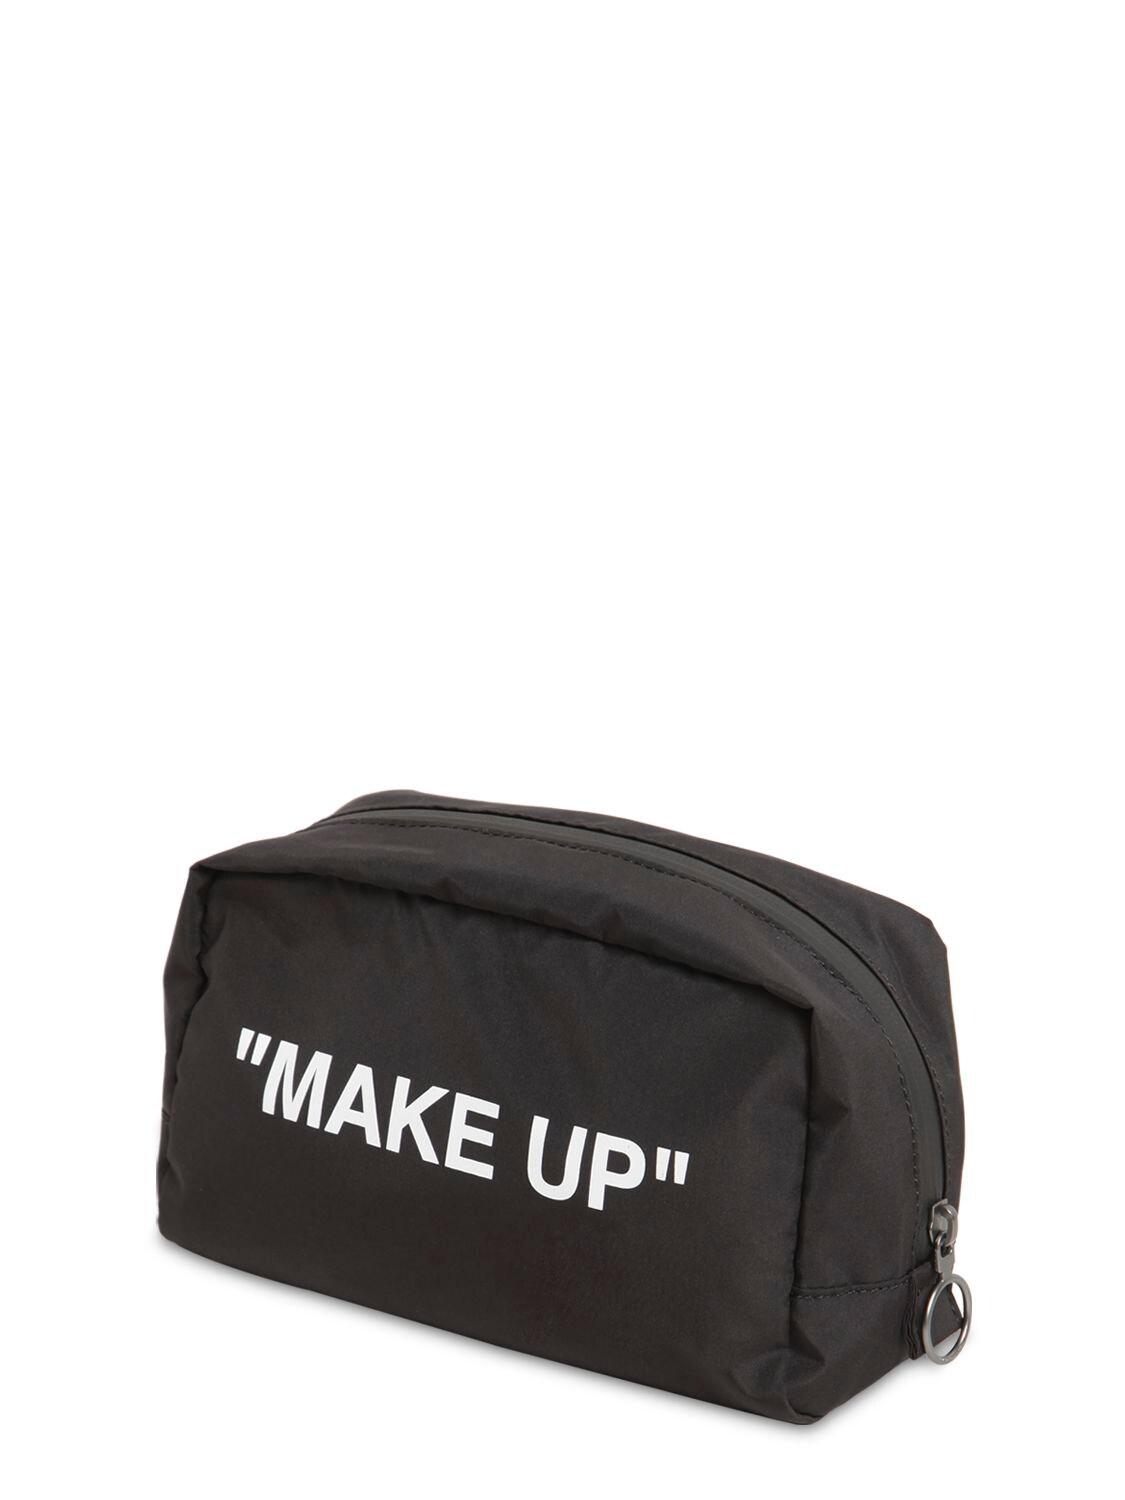 Off-White c/o Virgil Abloh Make Up Print Pouch in Black | Lyst